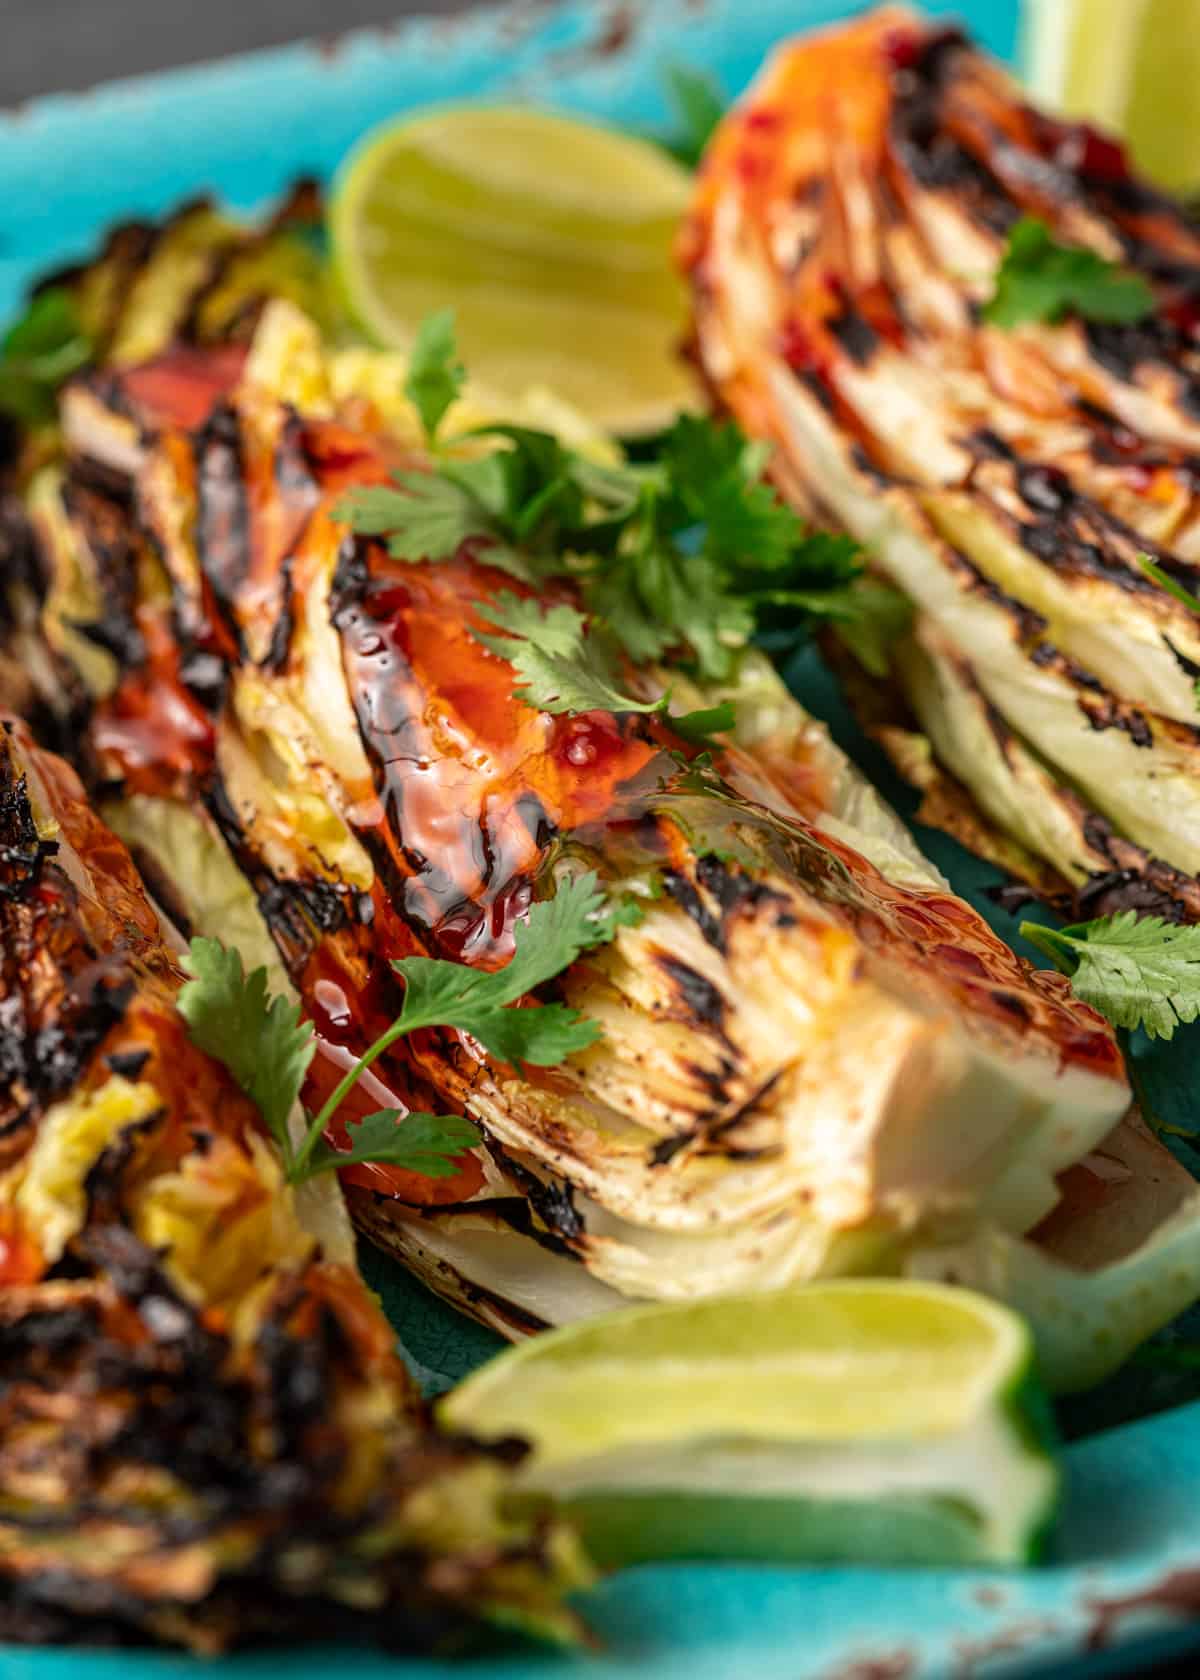 extreme closeup: charred cabbage with sweet chili sauce, fresh herbs, and a lime slice